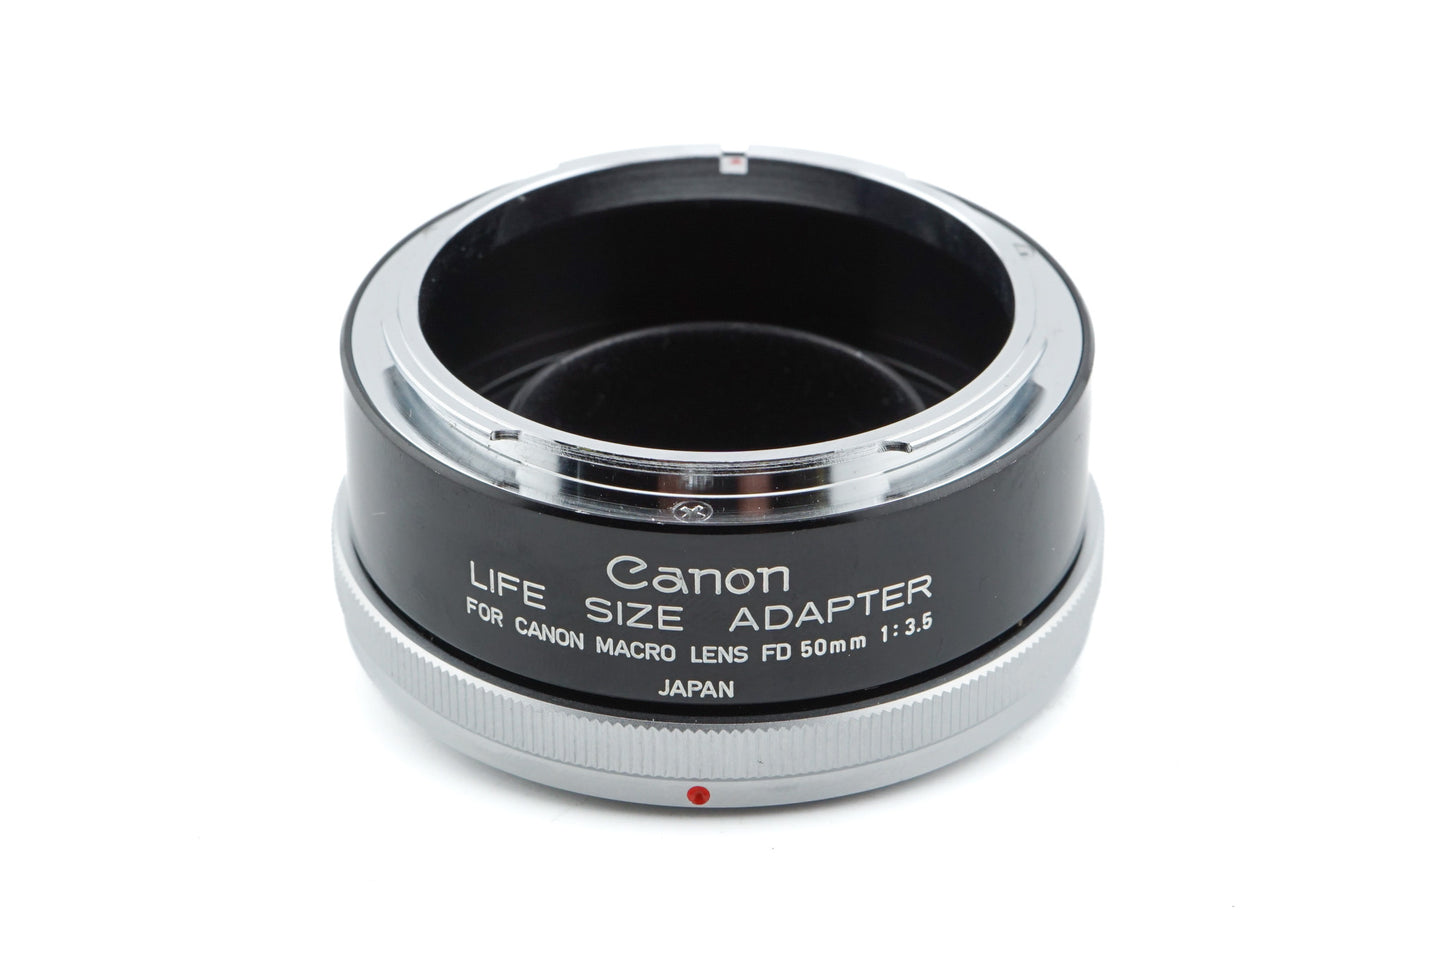 Canon Life Size Adapter for Canon Macro Lens FD 50mm f3.5 - Lens Adapter